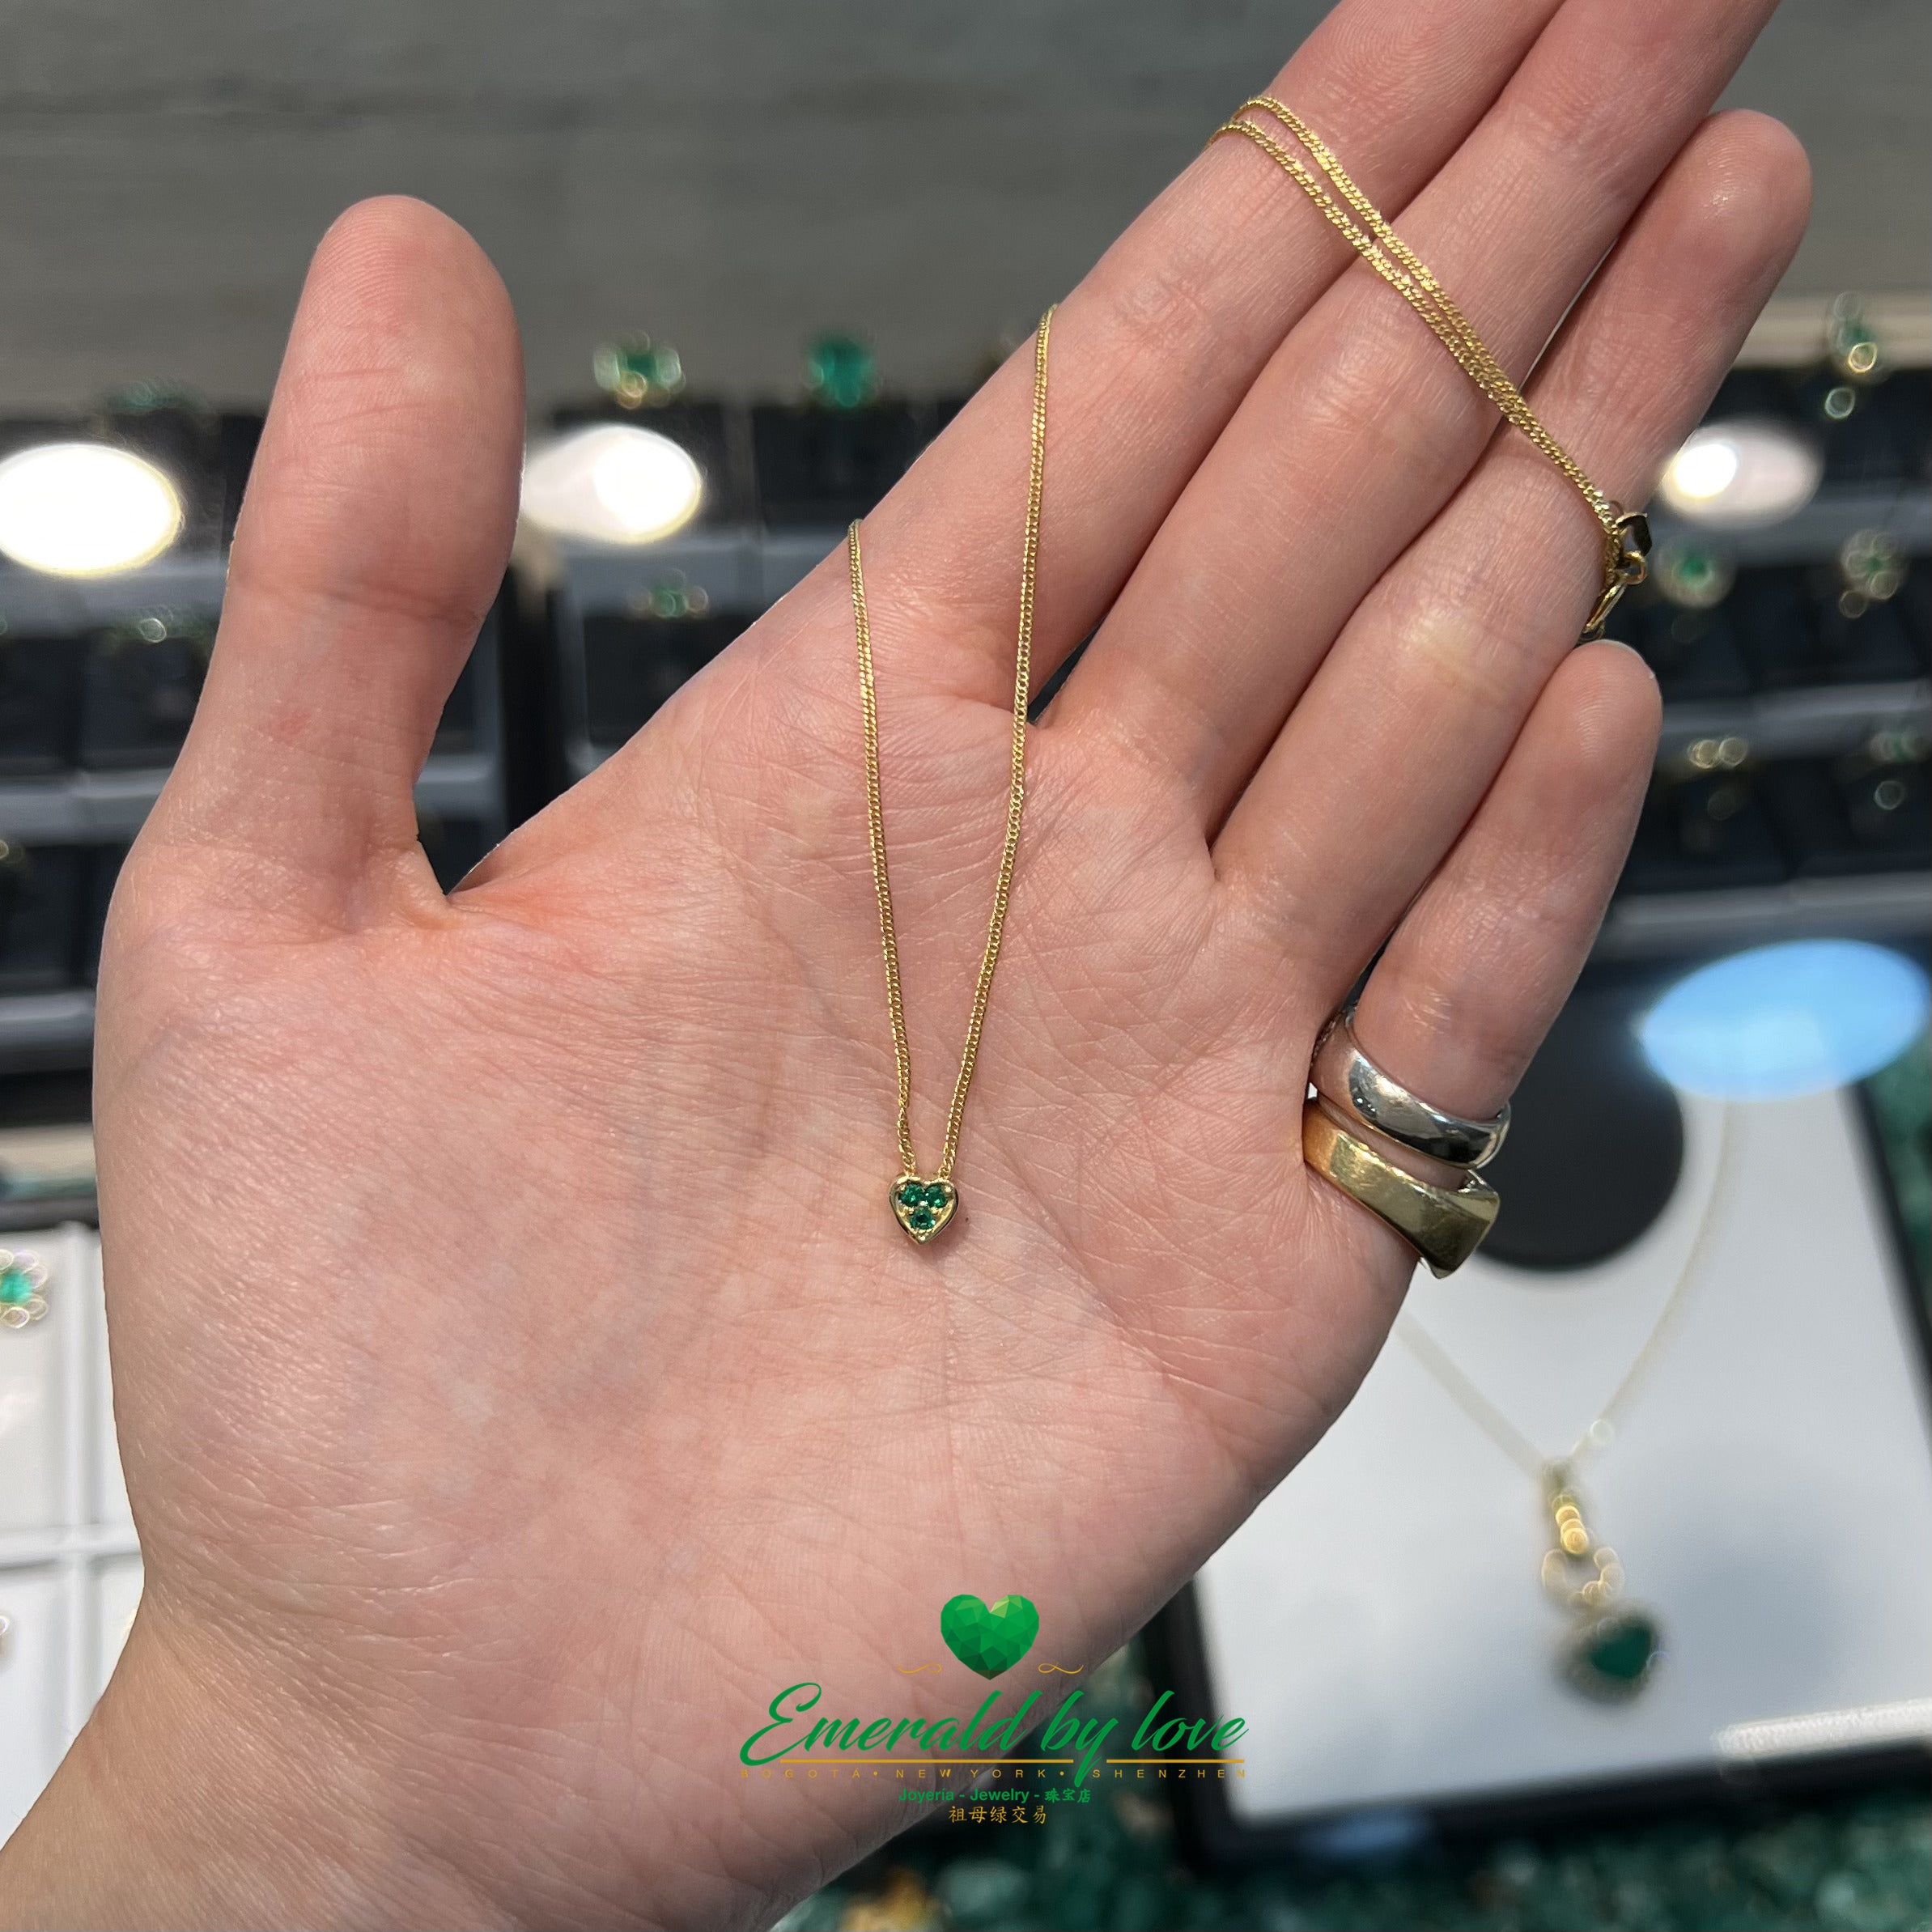 Dainty Heart Pendant with Delicate Round Emeralds